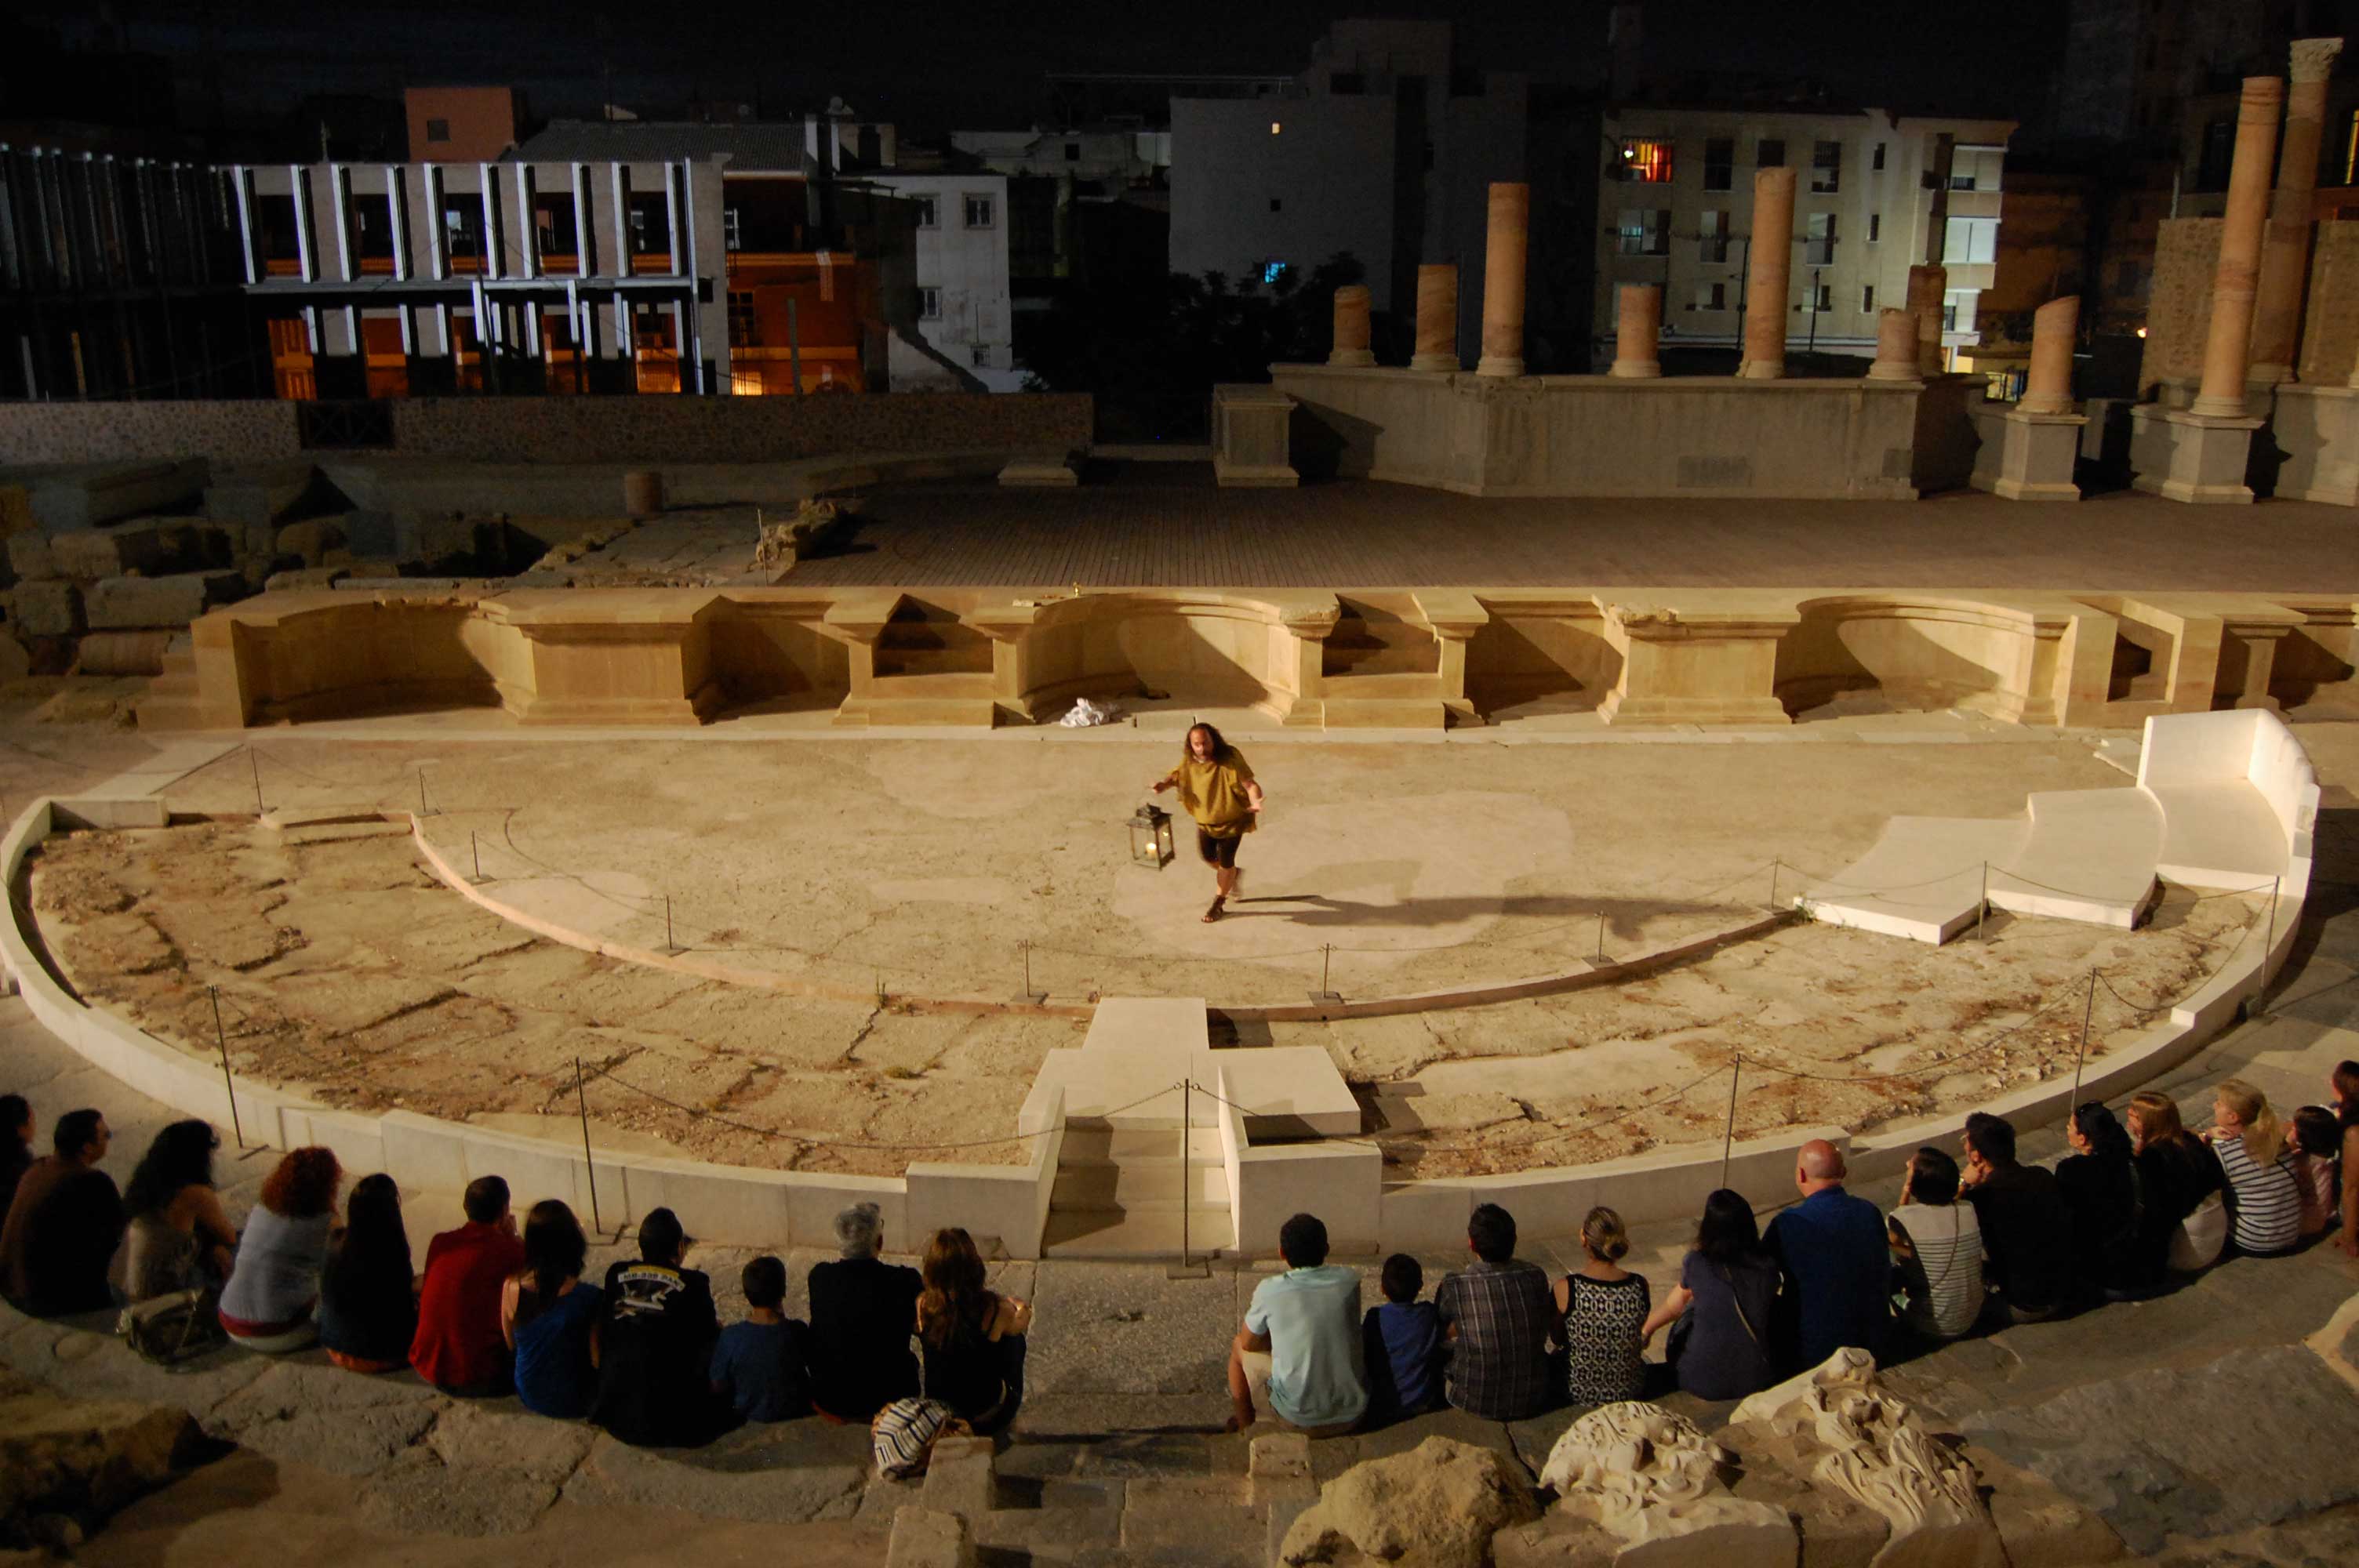 THE ROMAN THEATER IN MAY AND JUNE. ACTIVITIES AND ROUTES